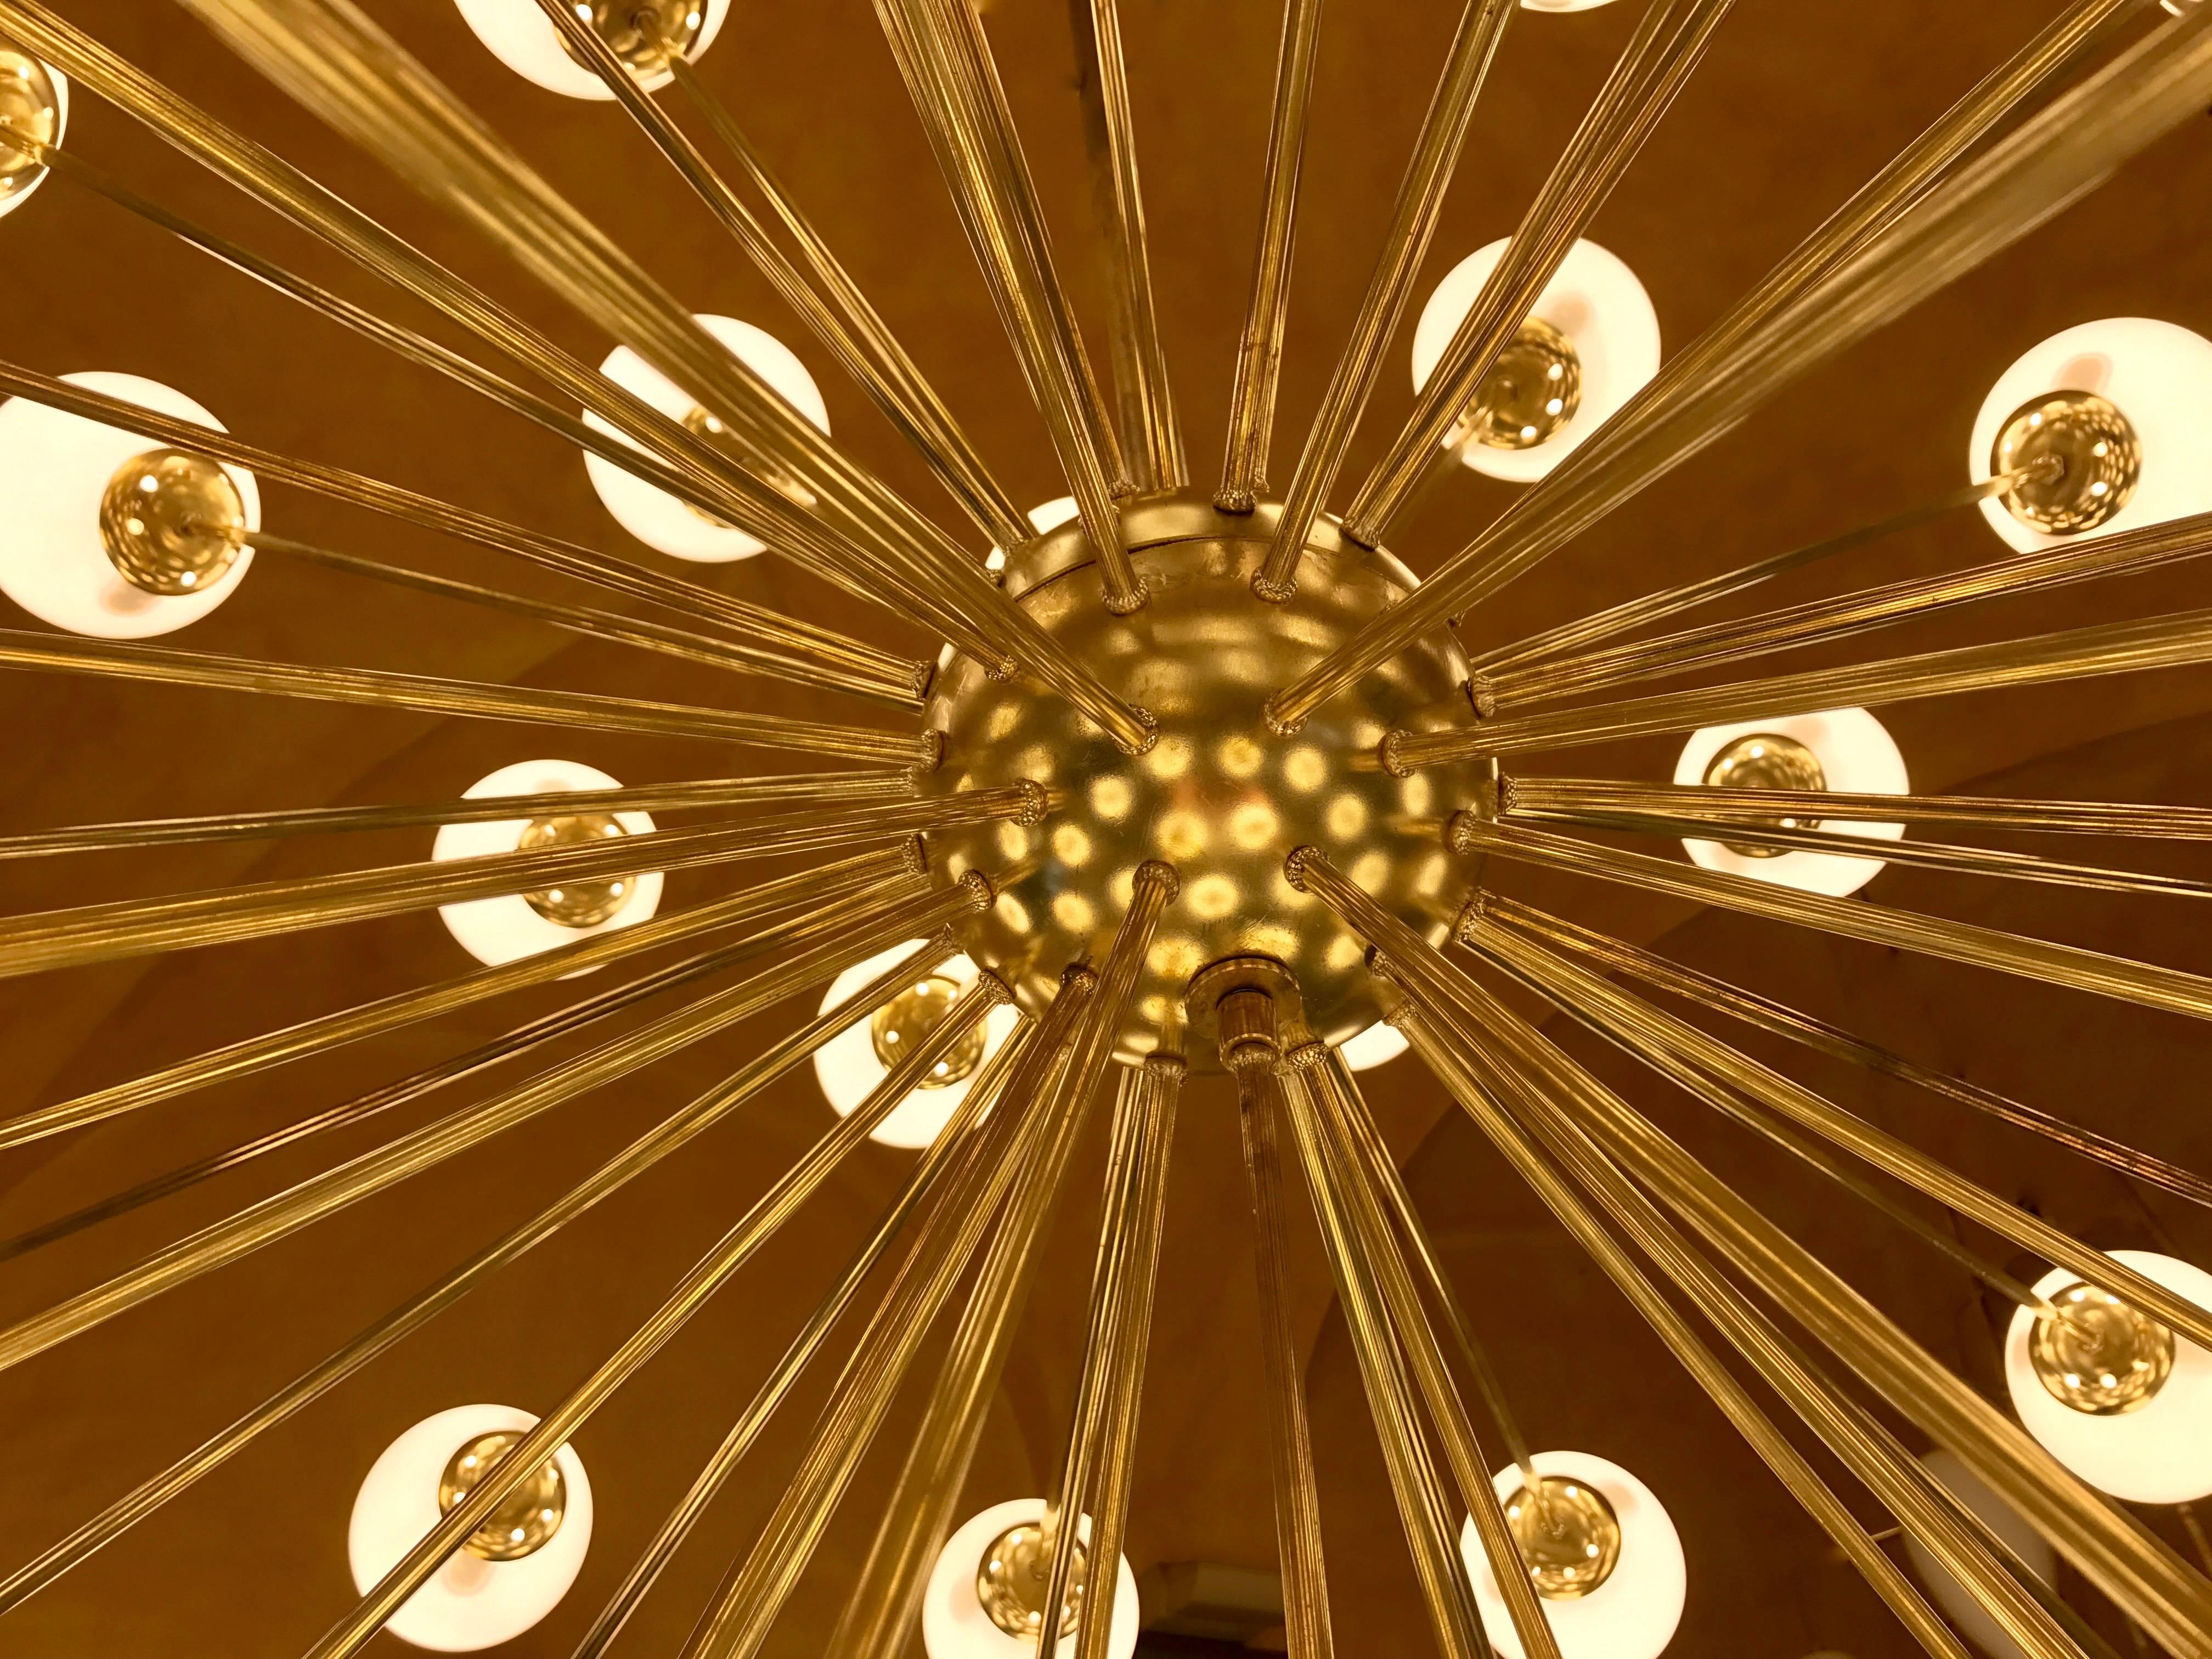 65 E14 light bulbs with brass clips to hold the opaline glass globe.